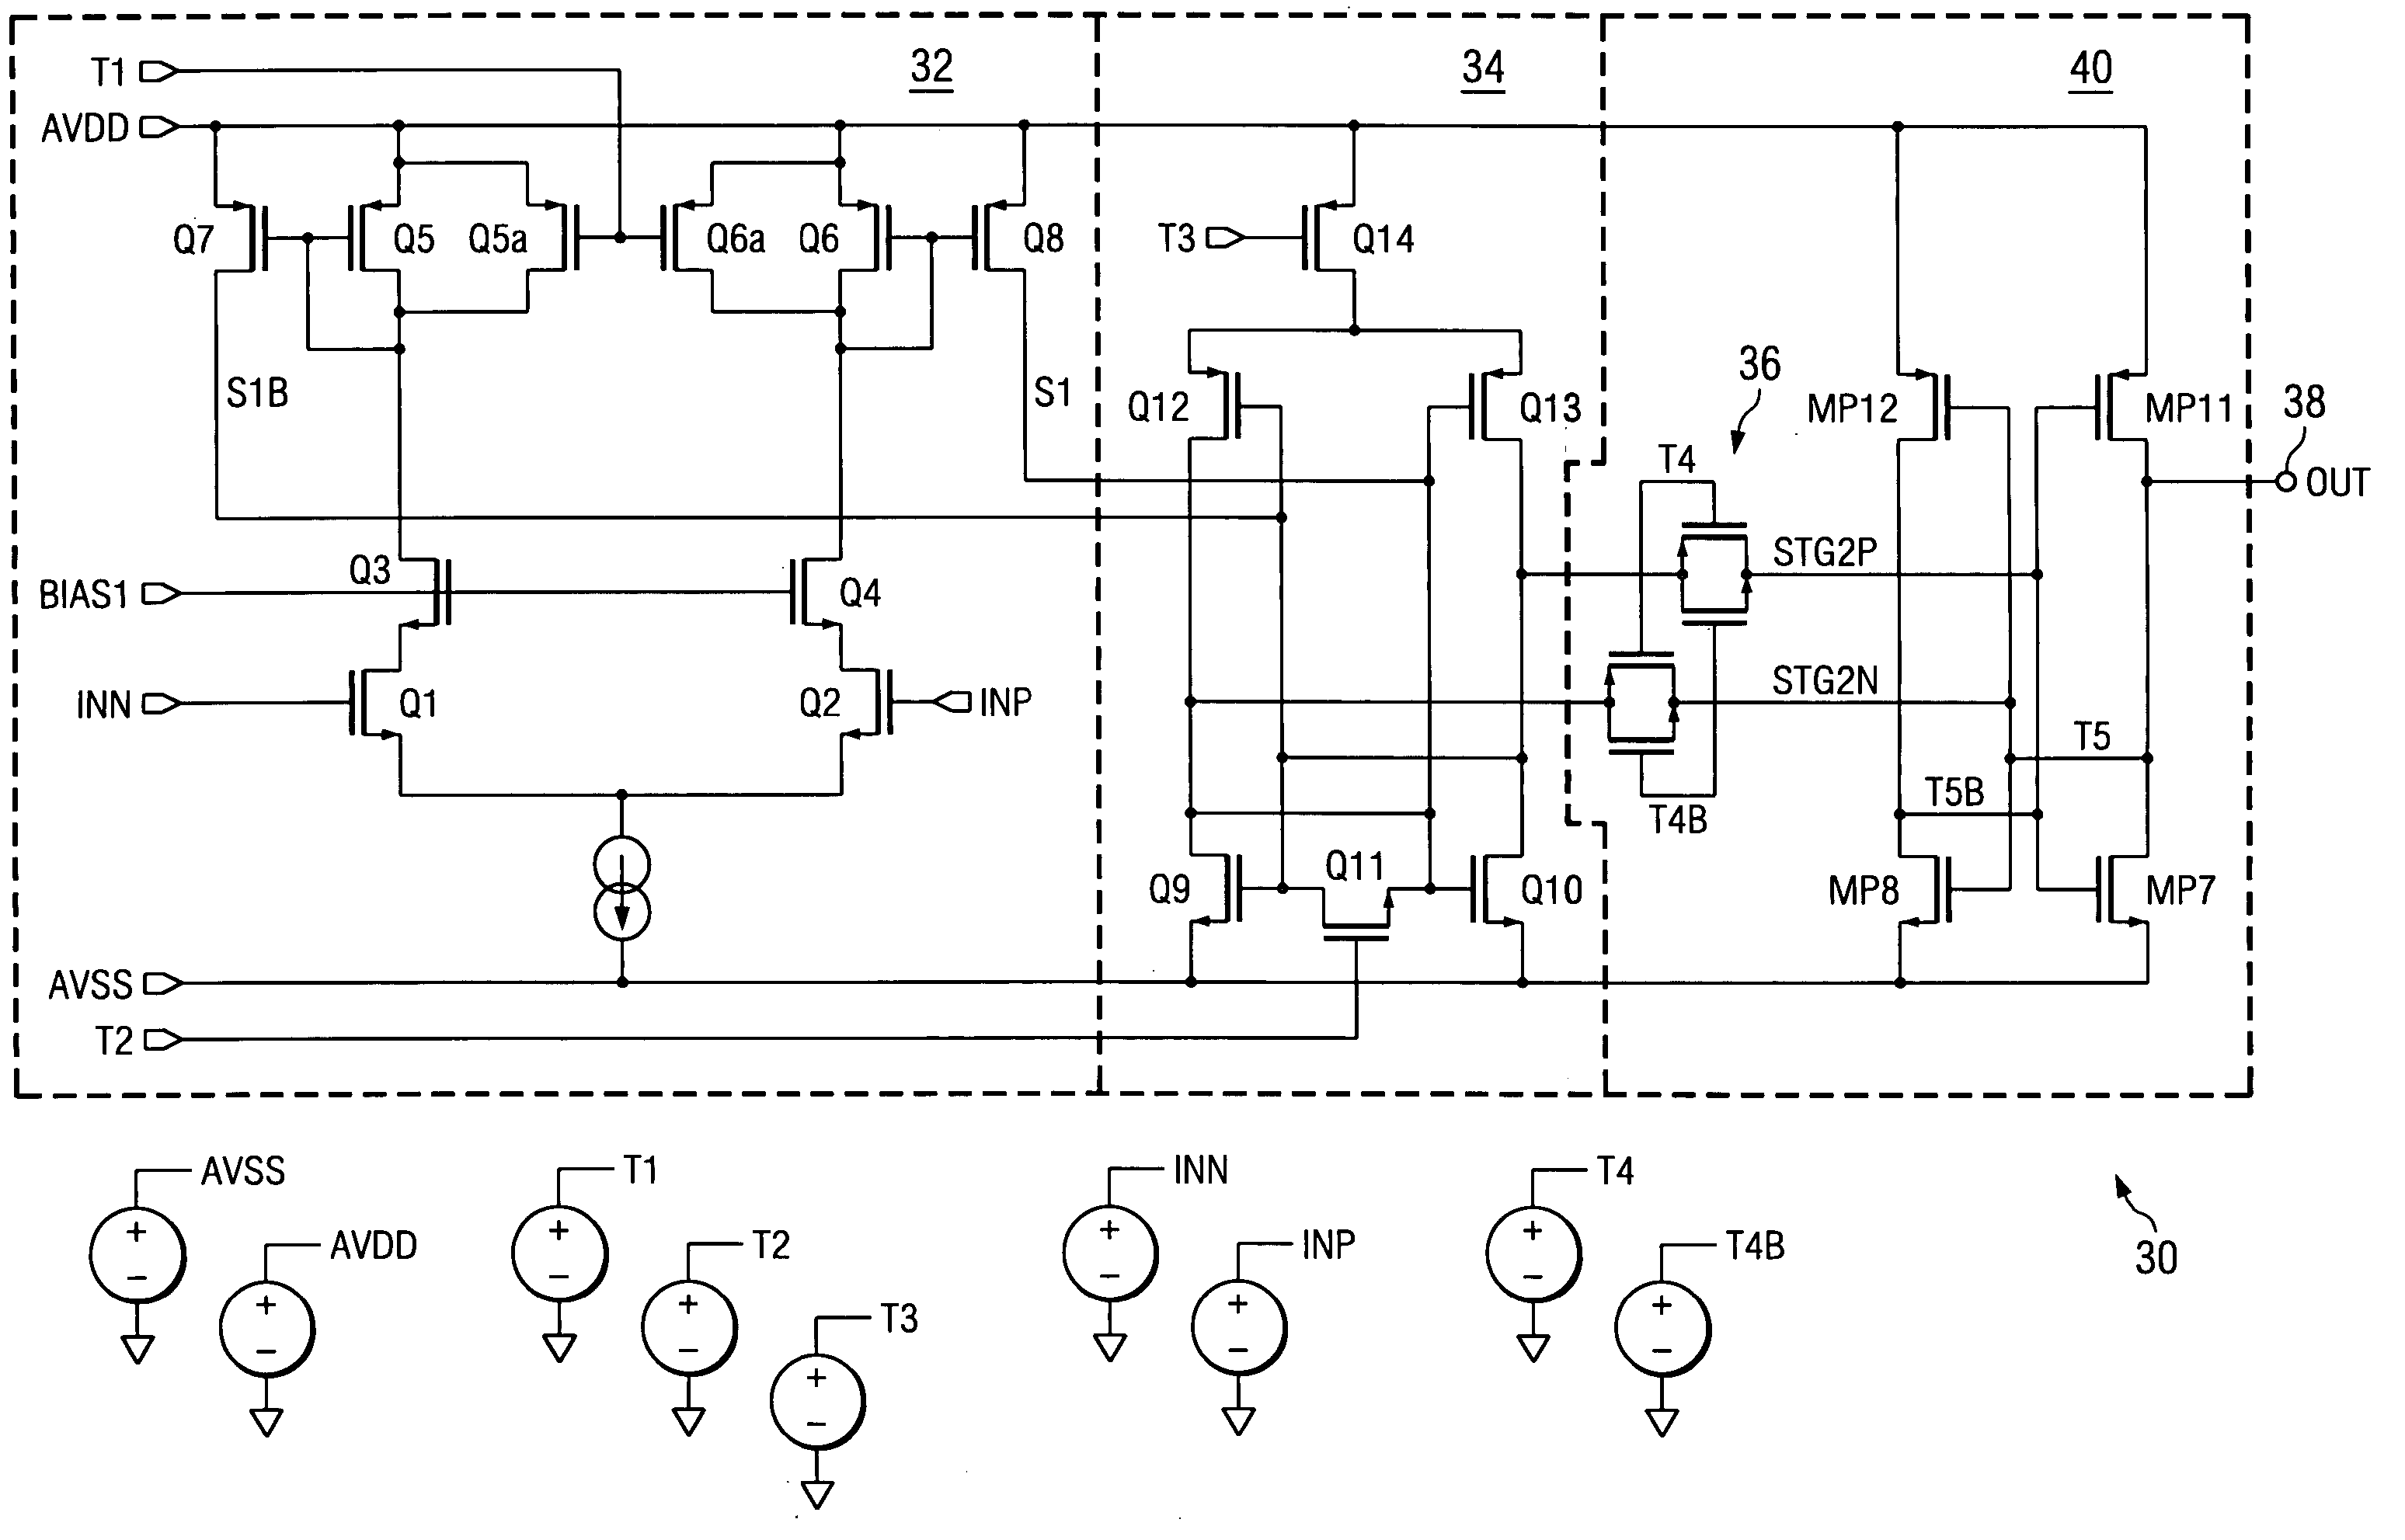 Efficient current monitoring for DC-DC converters